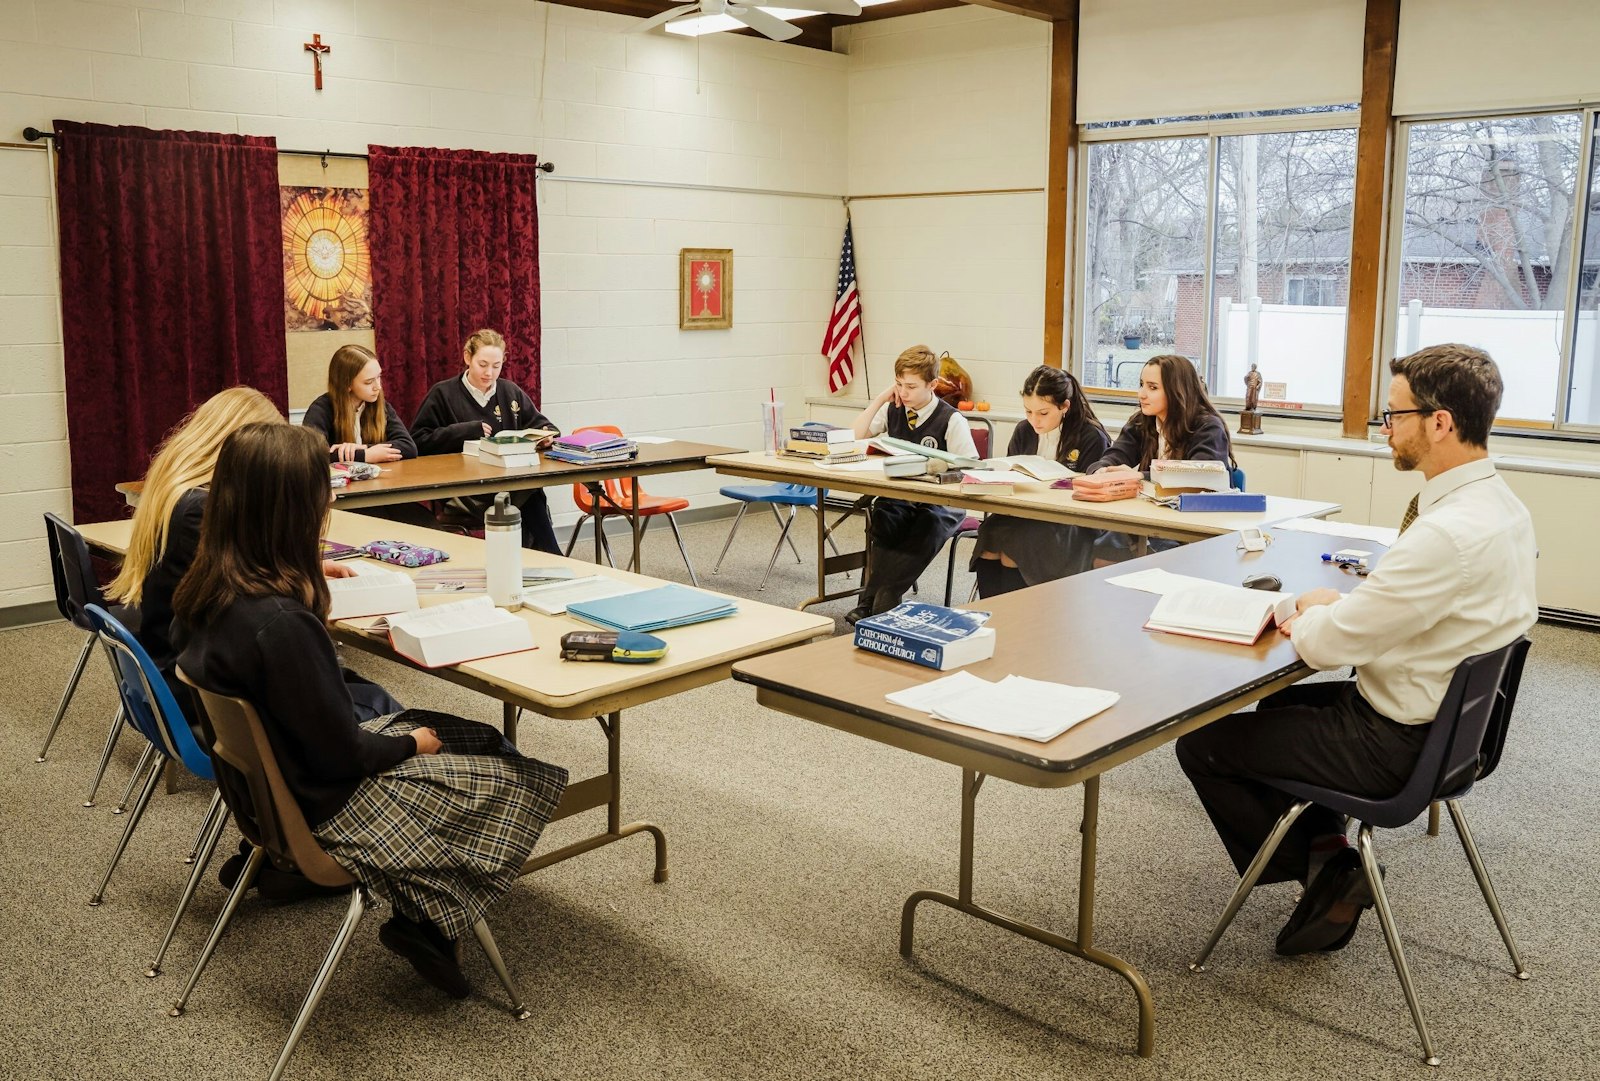 Teachers at Chesterton Academy of Our Lady of Guadalupe use the Socratic method of teaching, a form of cooperative argumentative dialogue between the teacher and student, emphasizing critical thinking skills and a holistic approach to learning.